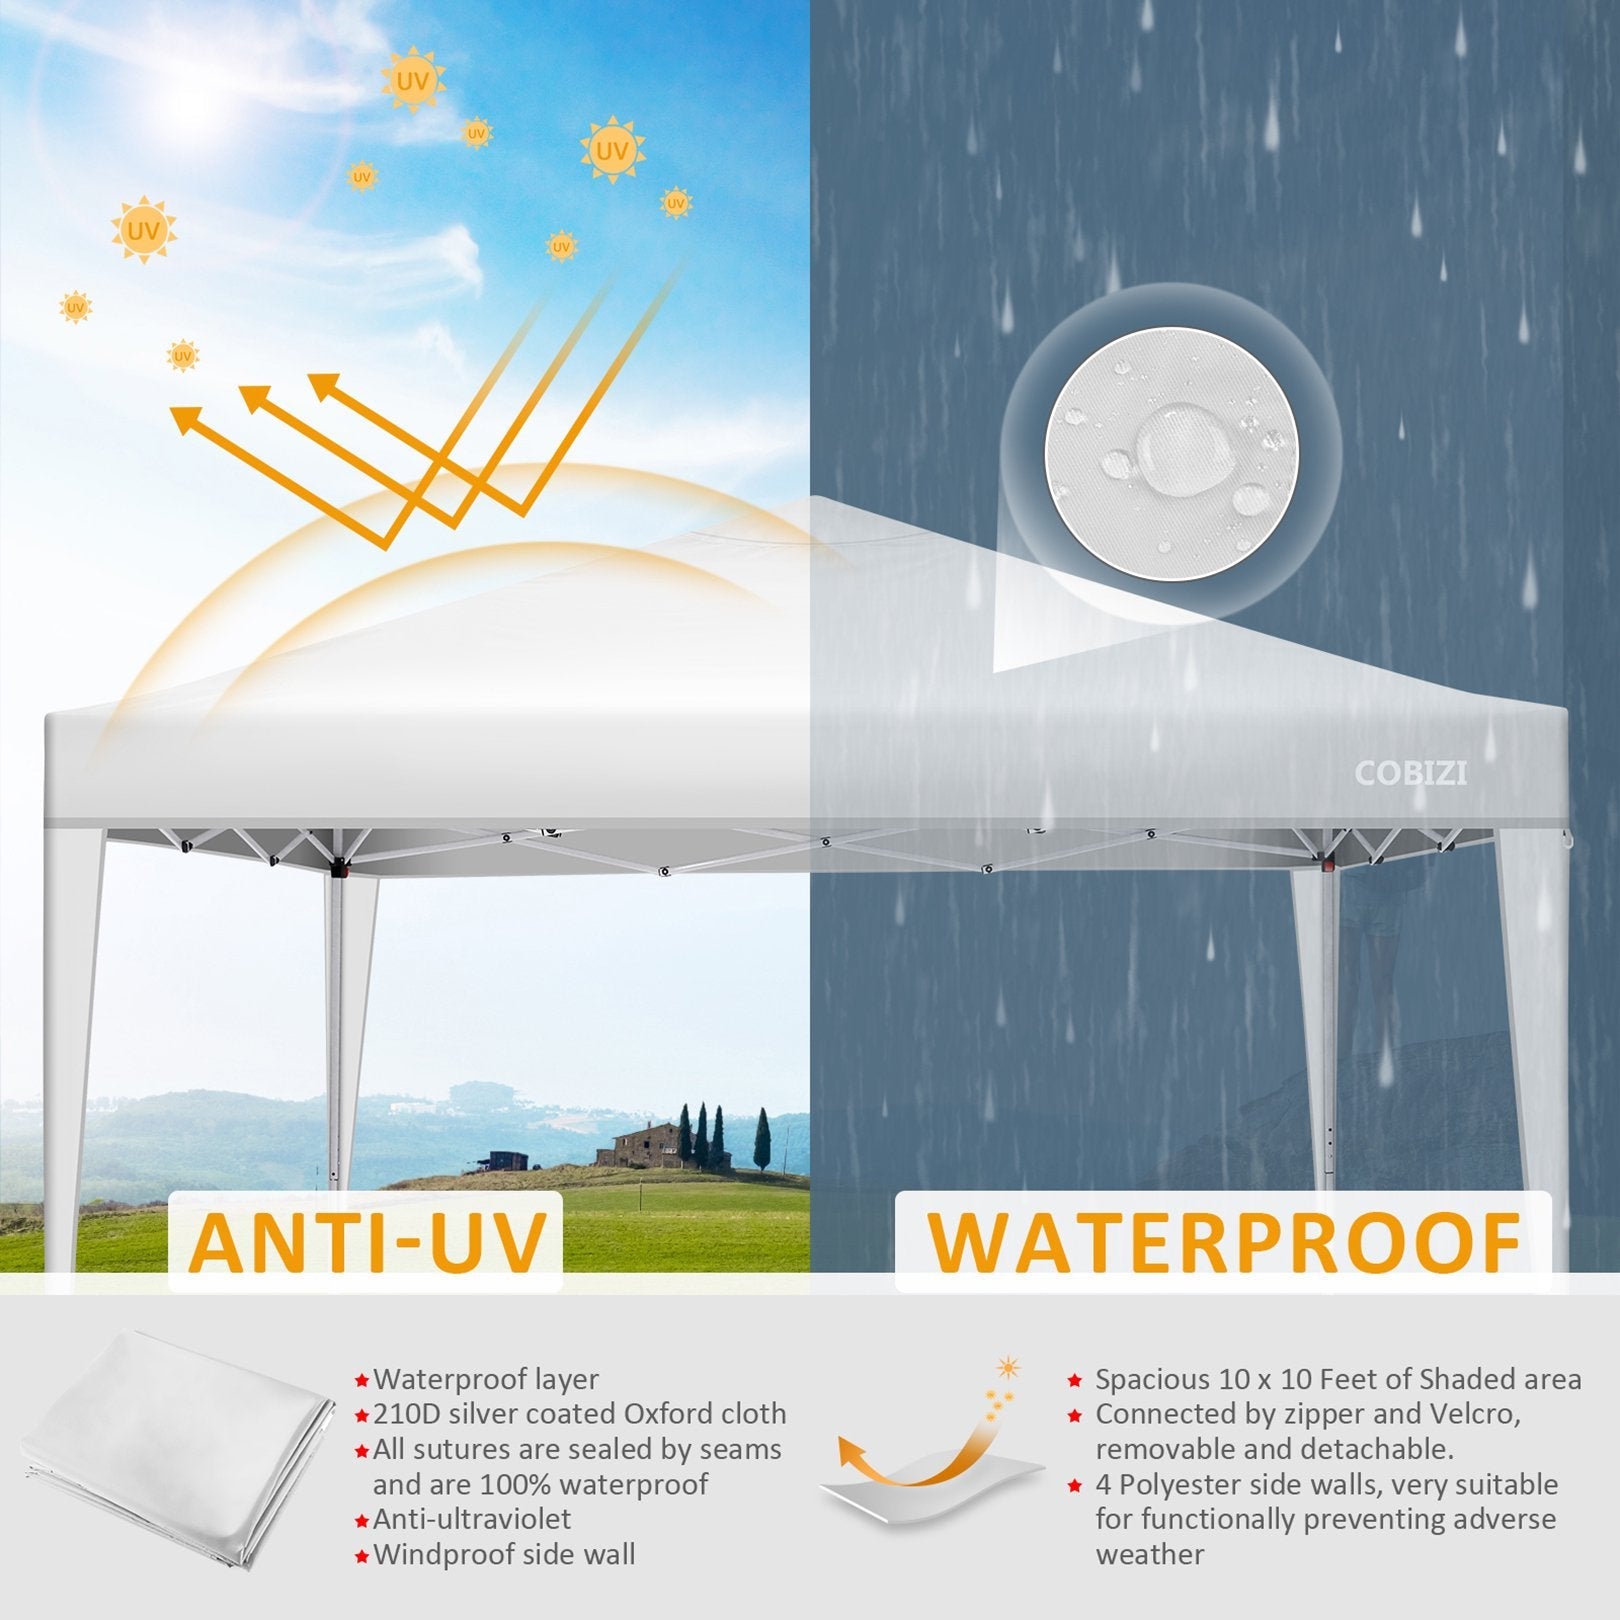 10 x 10ft Pop Up Canopy Tent Instant Outdoor Party Canopy Straight Leg Commercial Gazebo Tent Shelter with 4 Removable Sidewalls and Carrying Bag, White